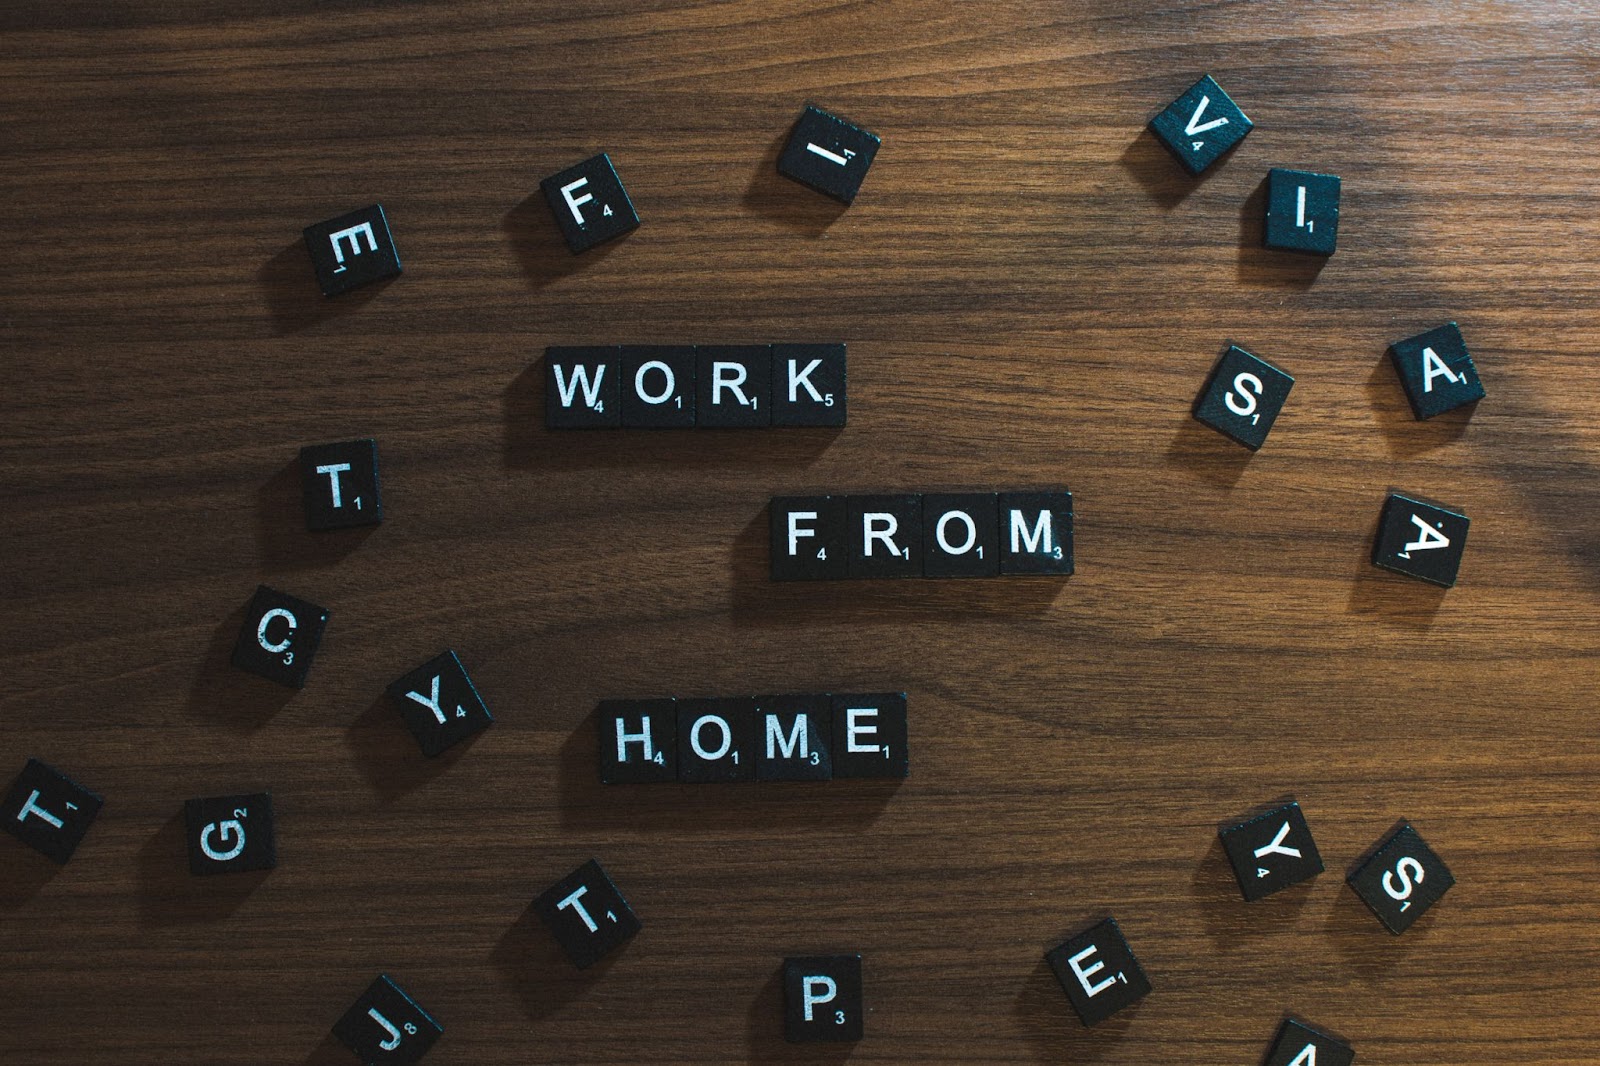 Work From Home Tiles on a Desk